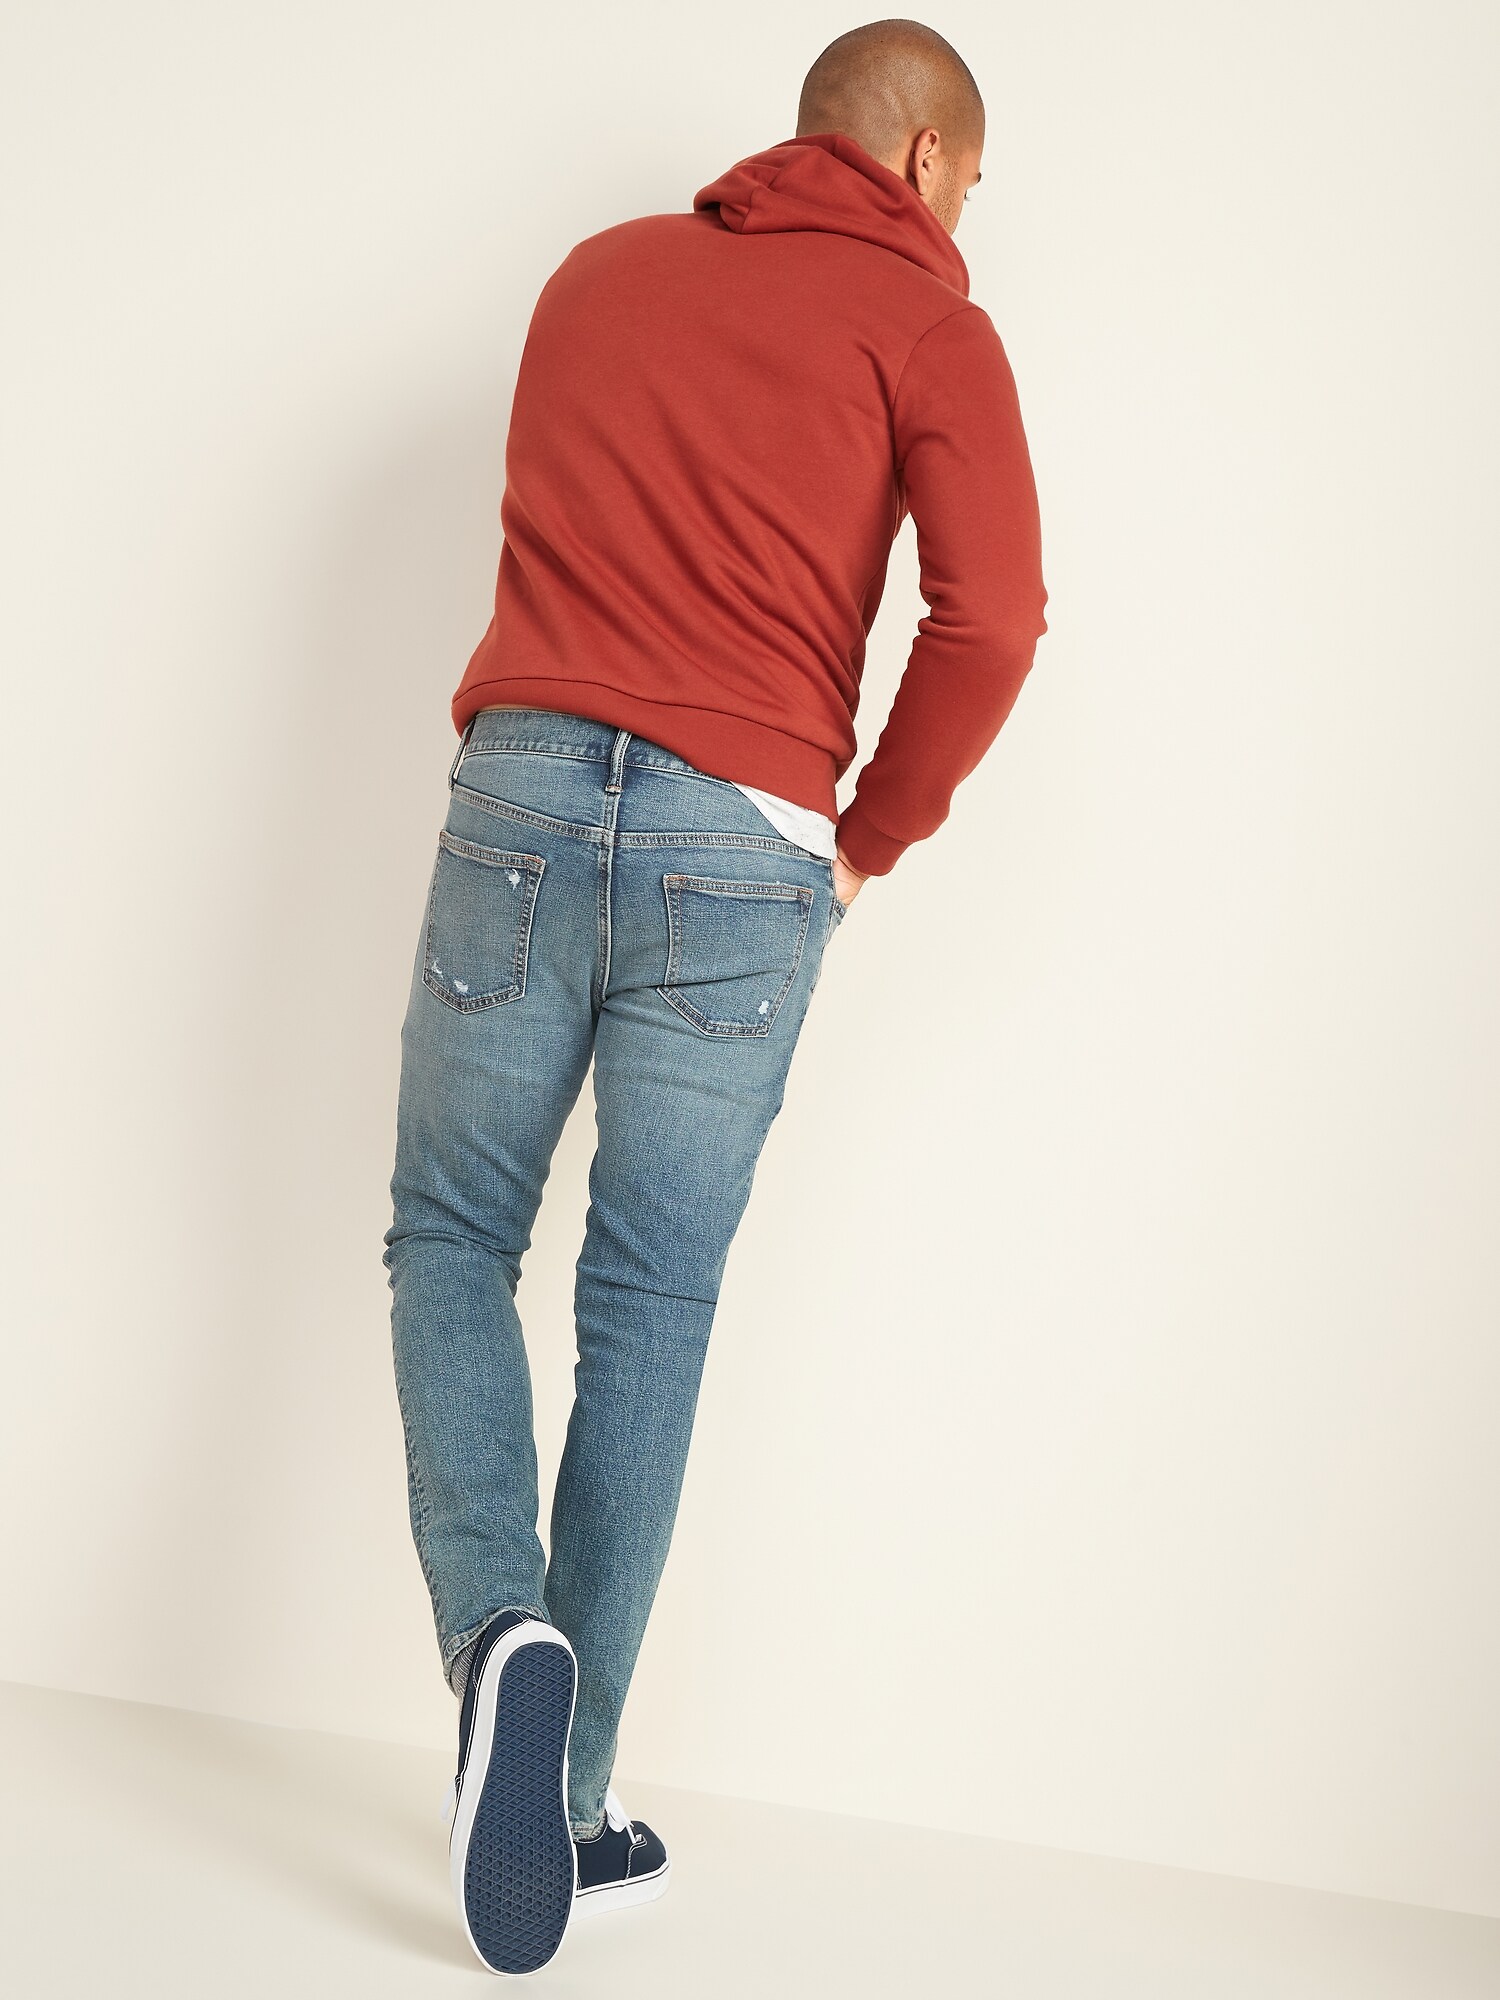 red rip jeans